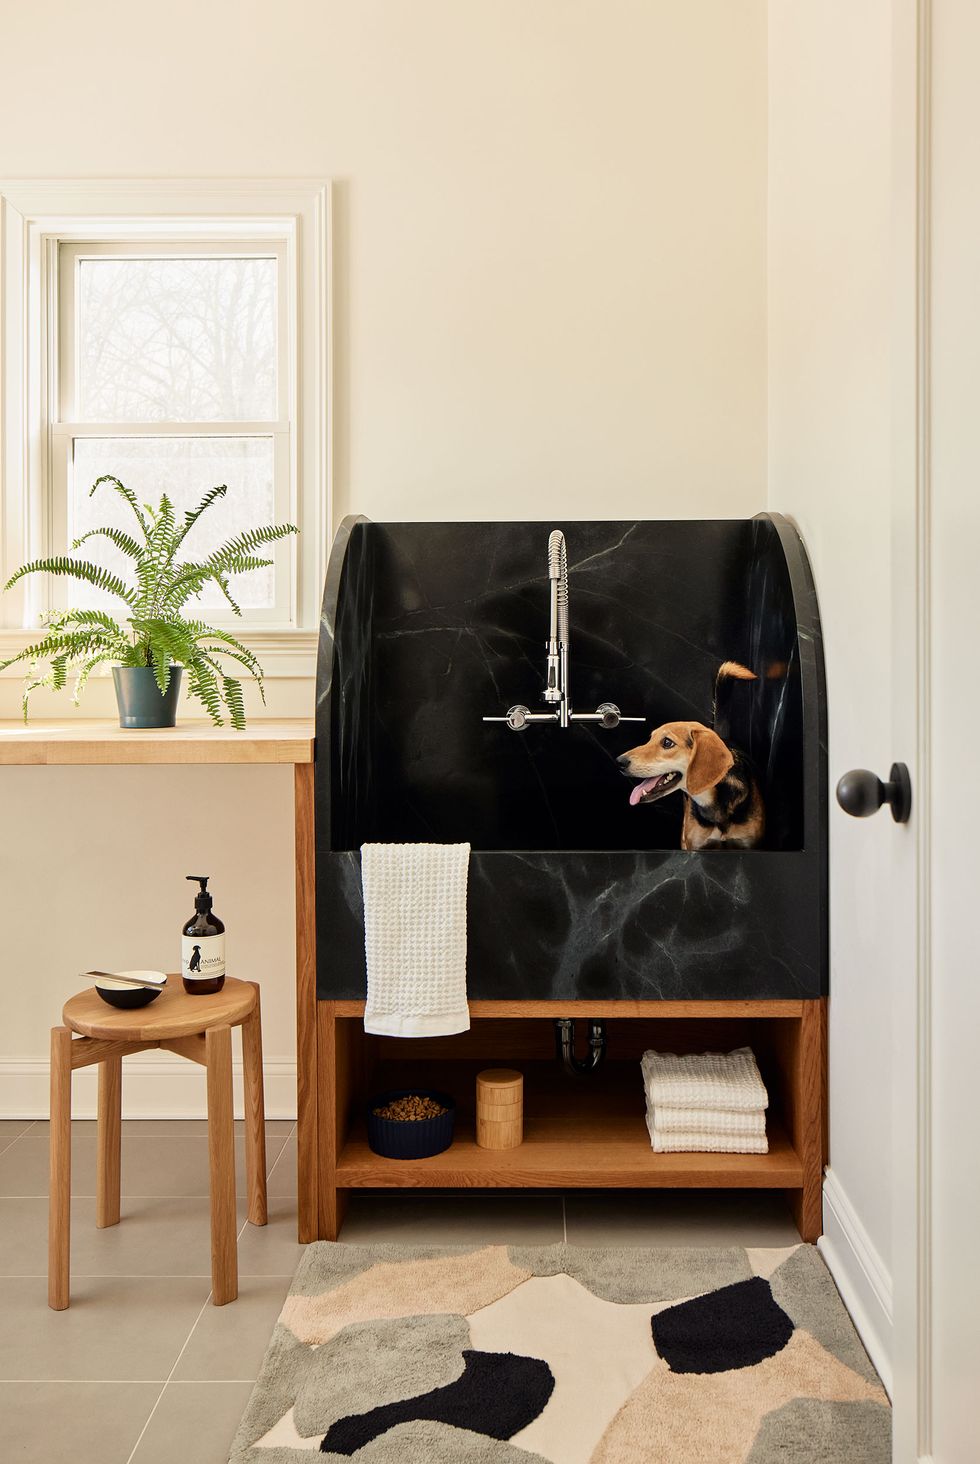 a small corner area with a black marble doggie bath and a cute little dog sitting in it waiting for a bath